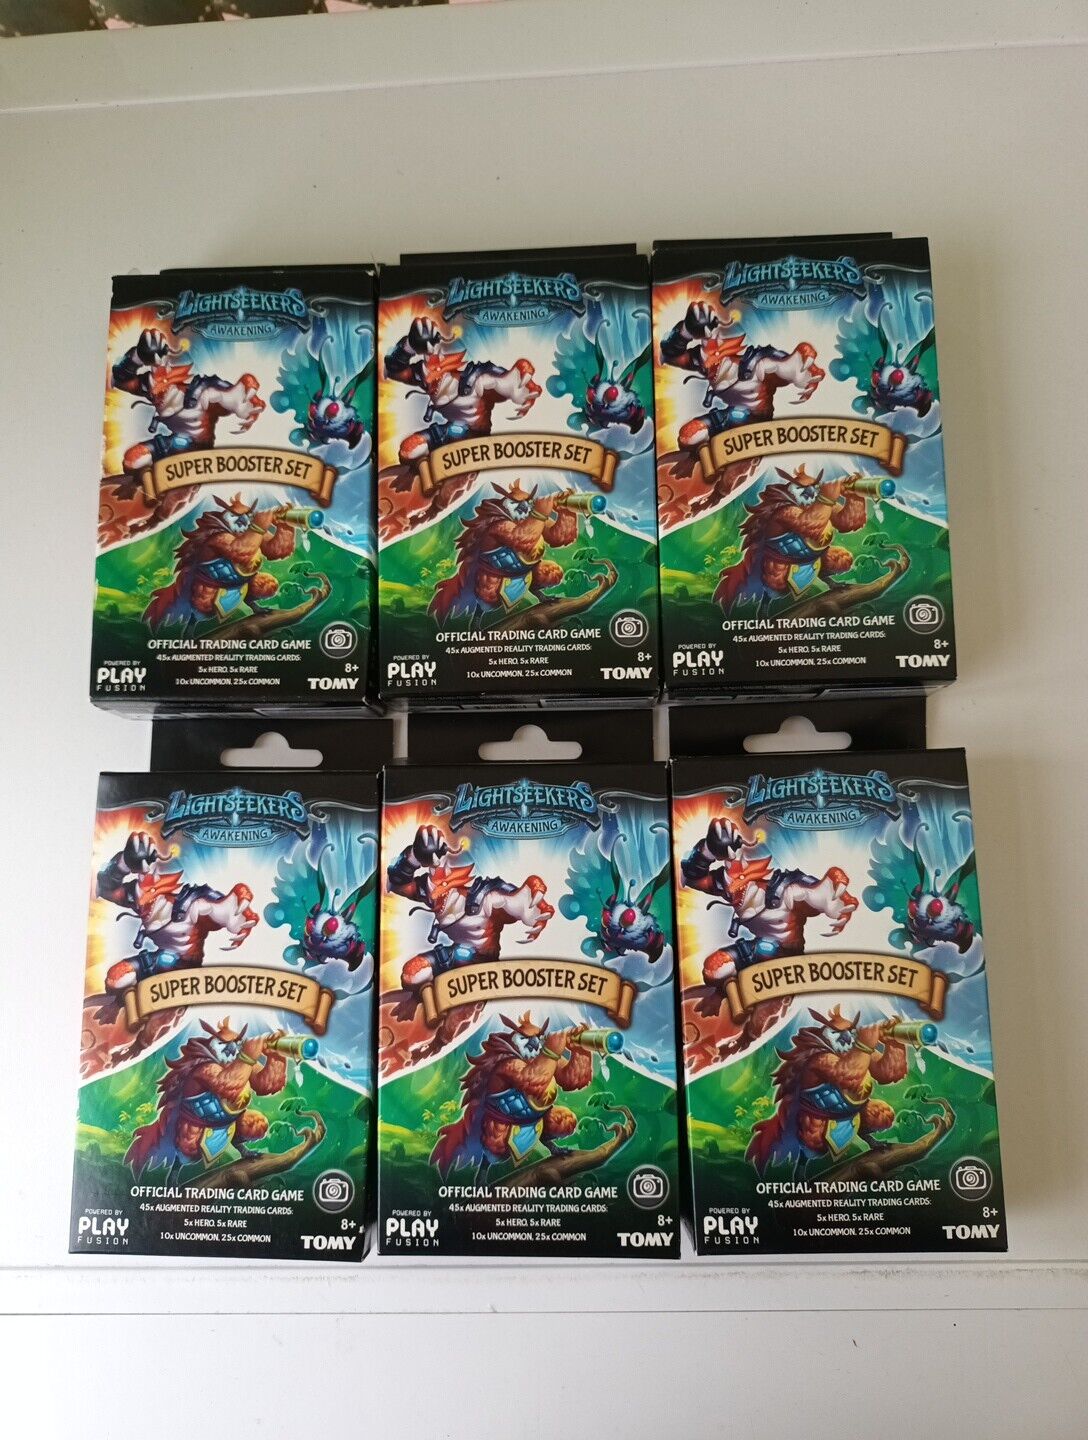 Lightseekers Awakening Super Booster Set Official Trading Card Game New Sealed